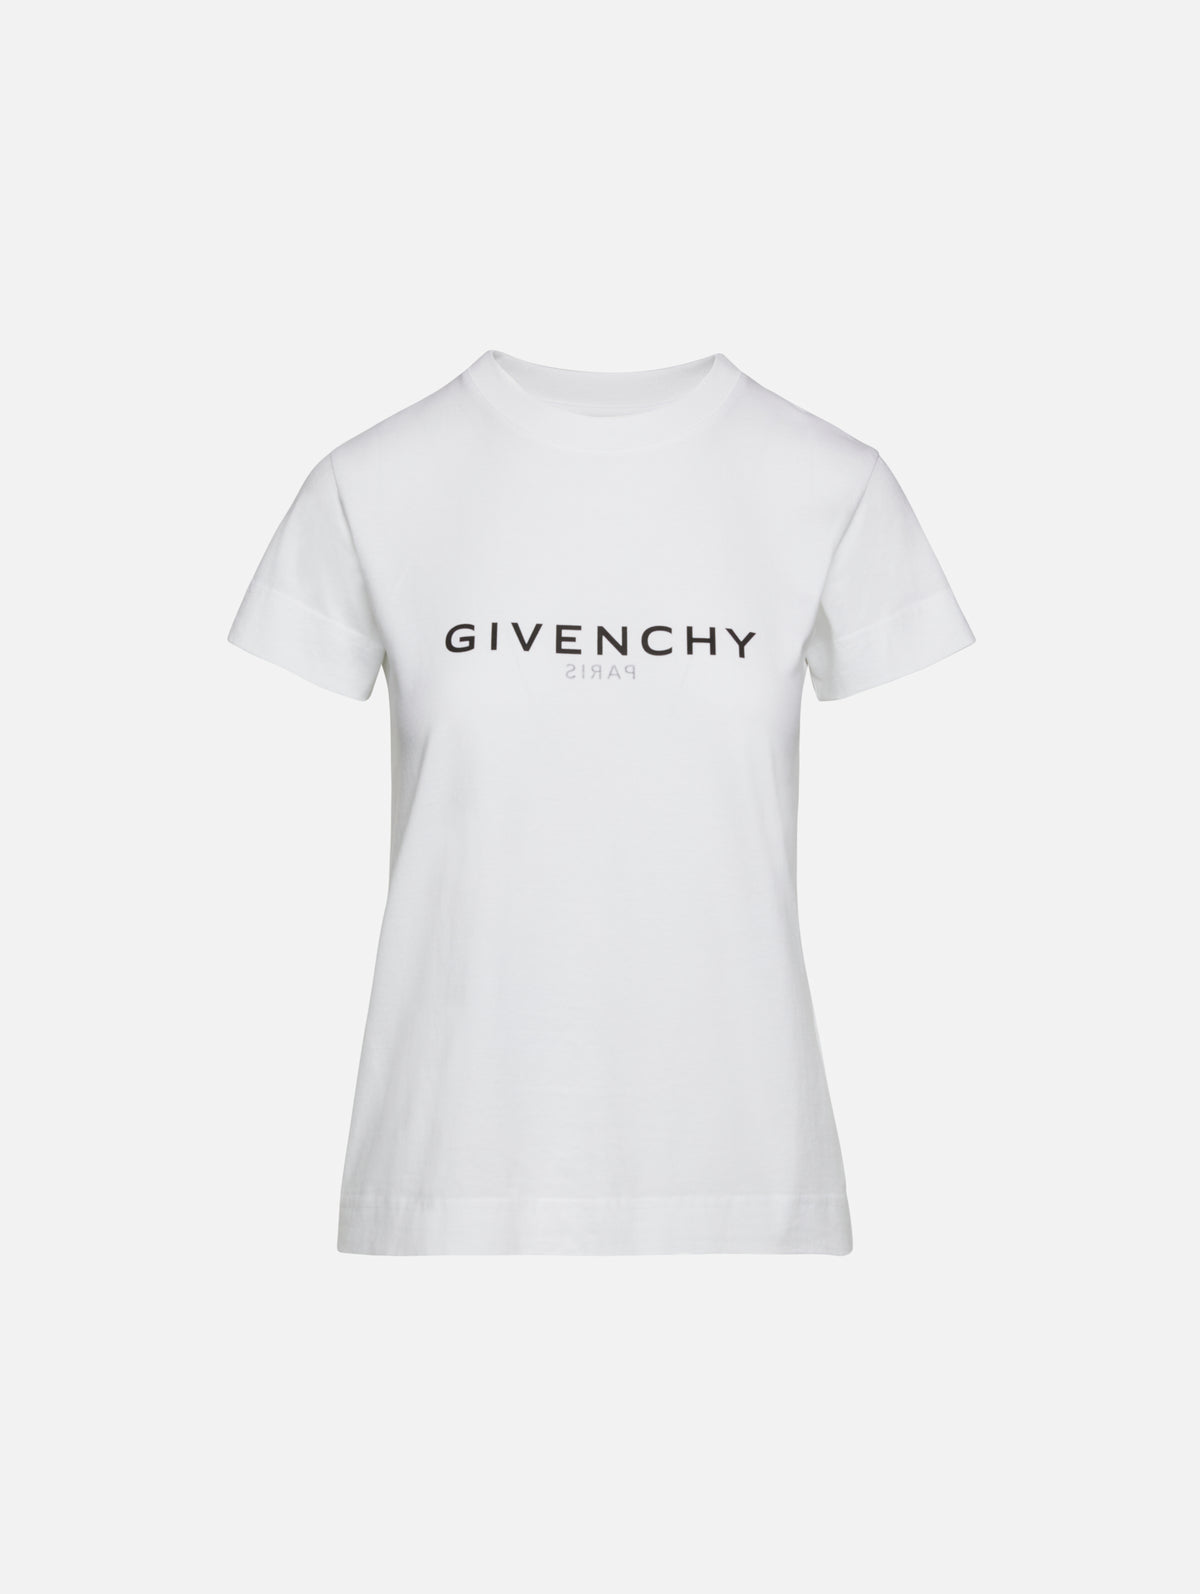 FITTED SHORT SLEEVE T SHIRT | GIVENCHY | ELYSEWALKER